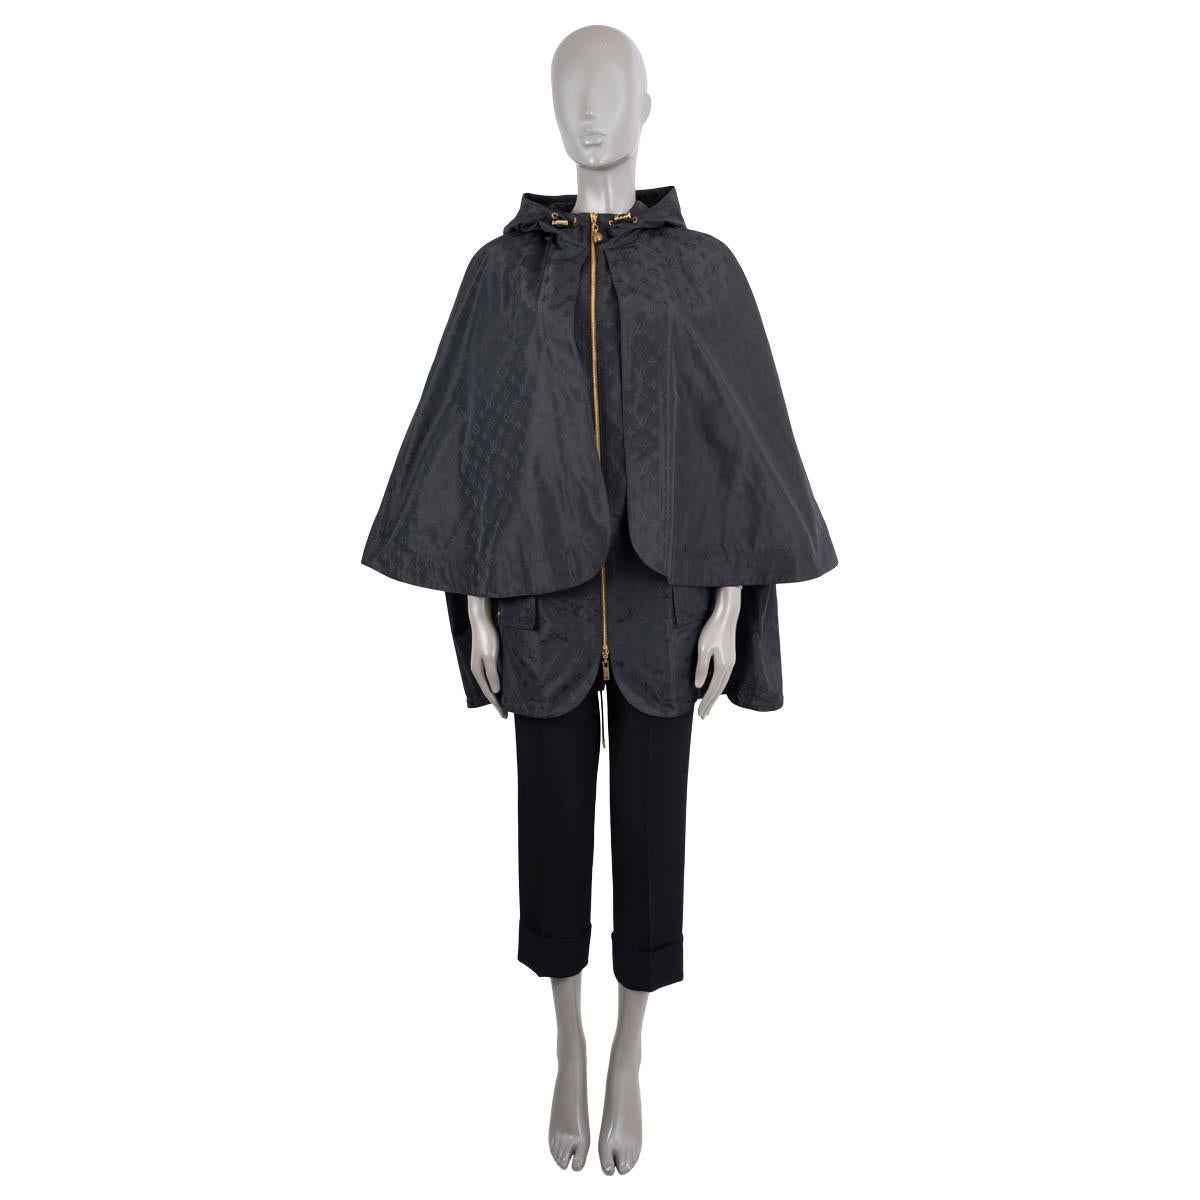 100% authentic Louis Vuitton 2022 sleeveless monogram parka cape in black polyester (53%) and silk (47%). The design features gold-tone hardware, two front flap pockets, double zipper closure and drawstring on hem and hood. Lined in black cotton